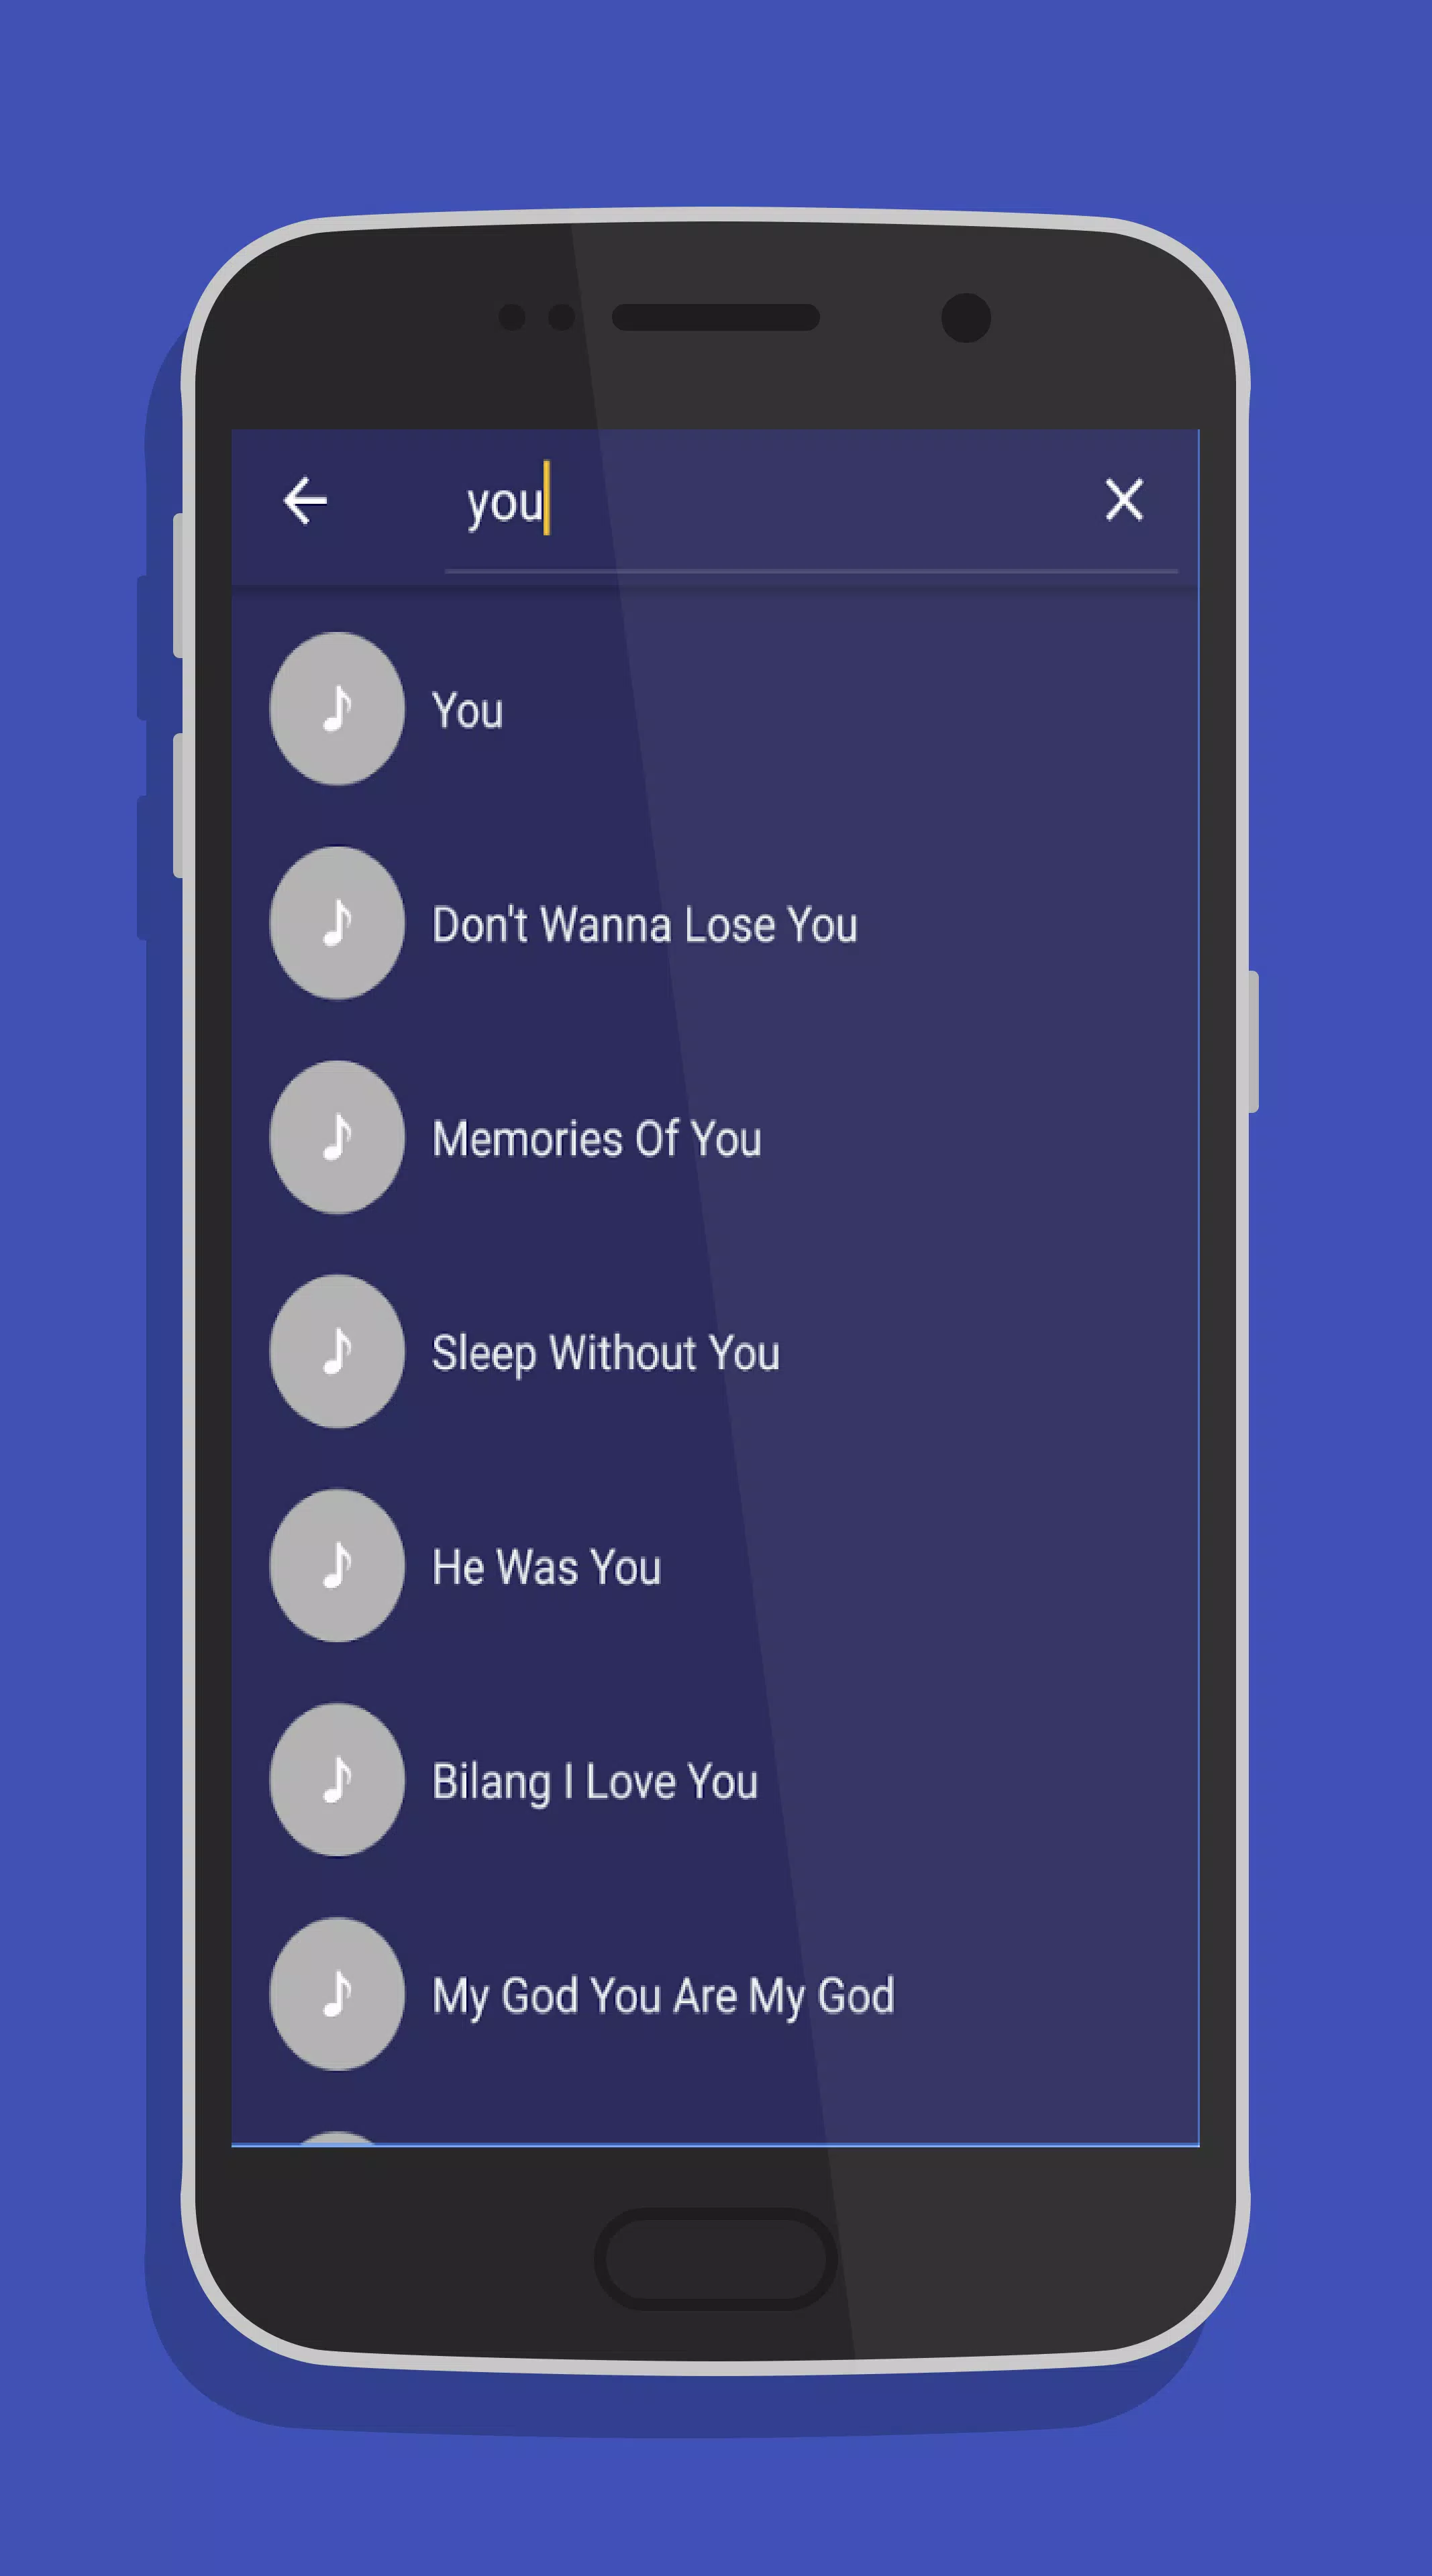 Download do APK de My Free Mp3 Music Download : Free Music Downloader para  Android